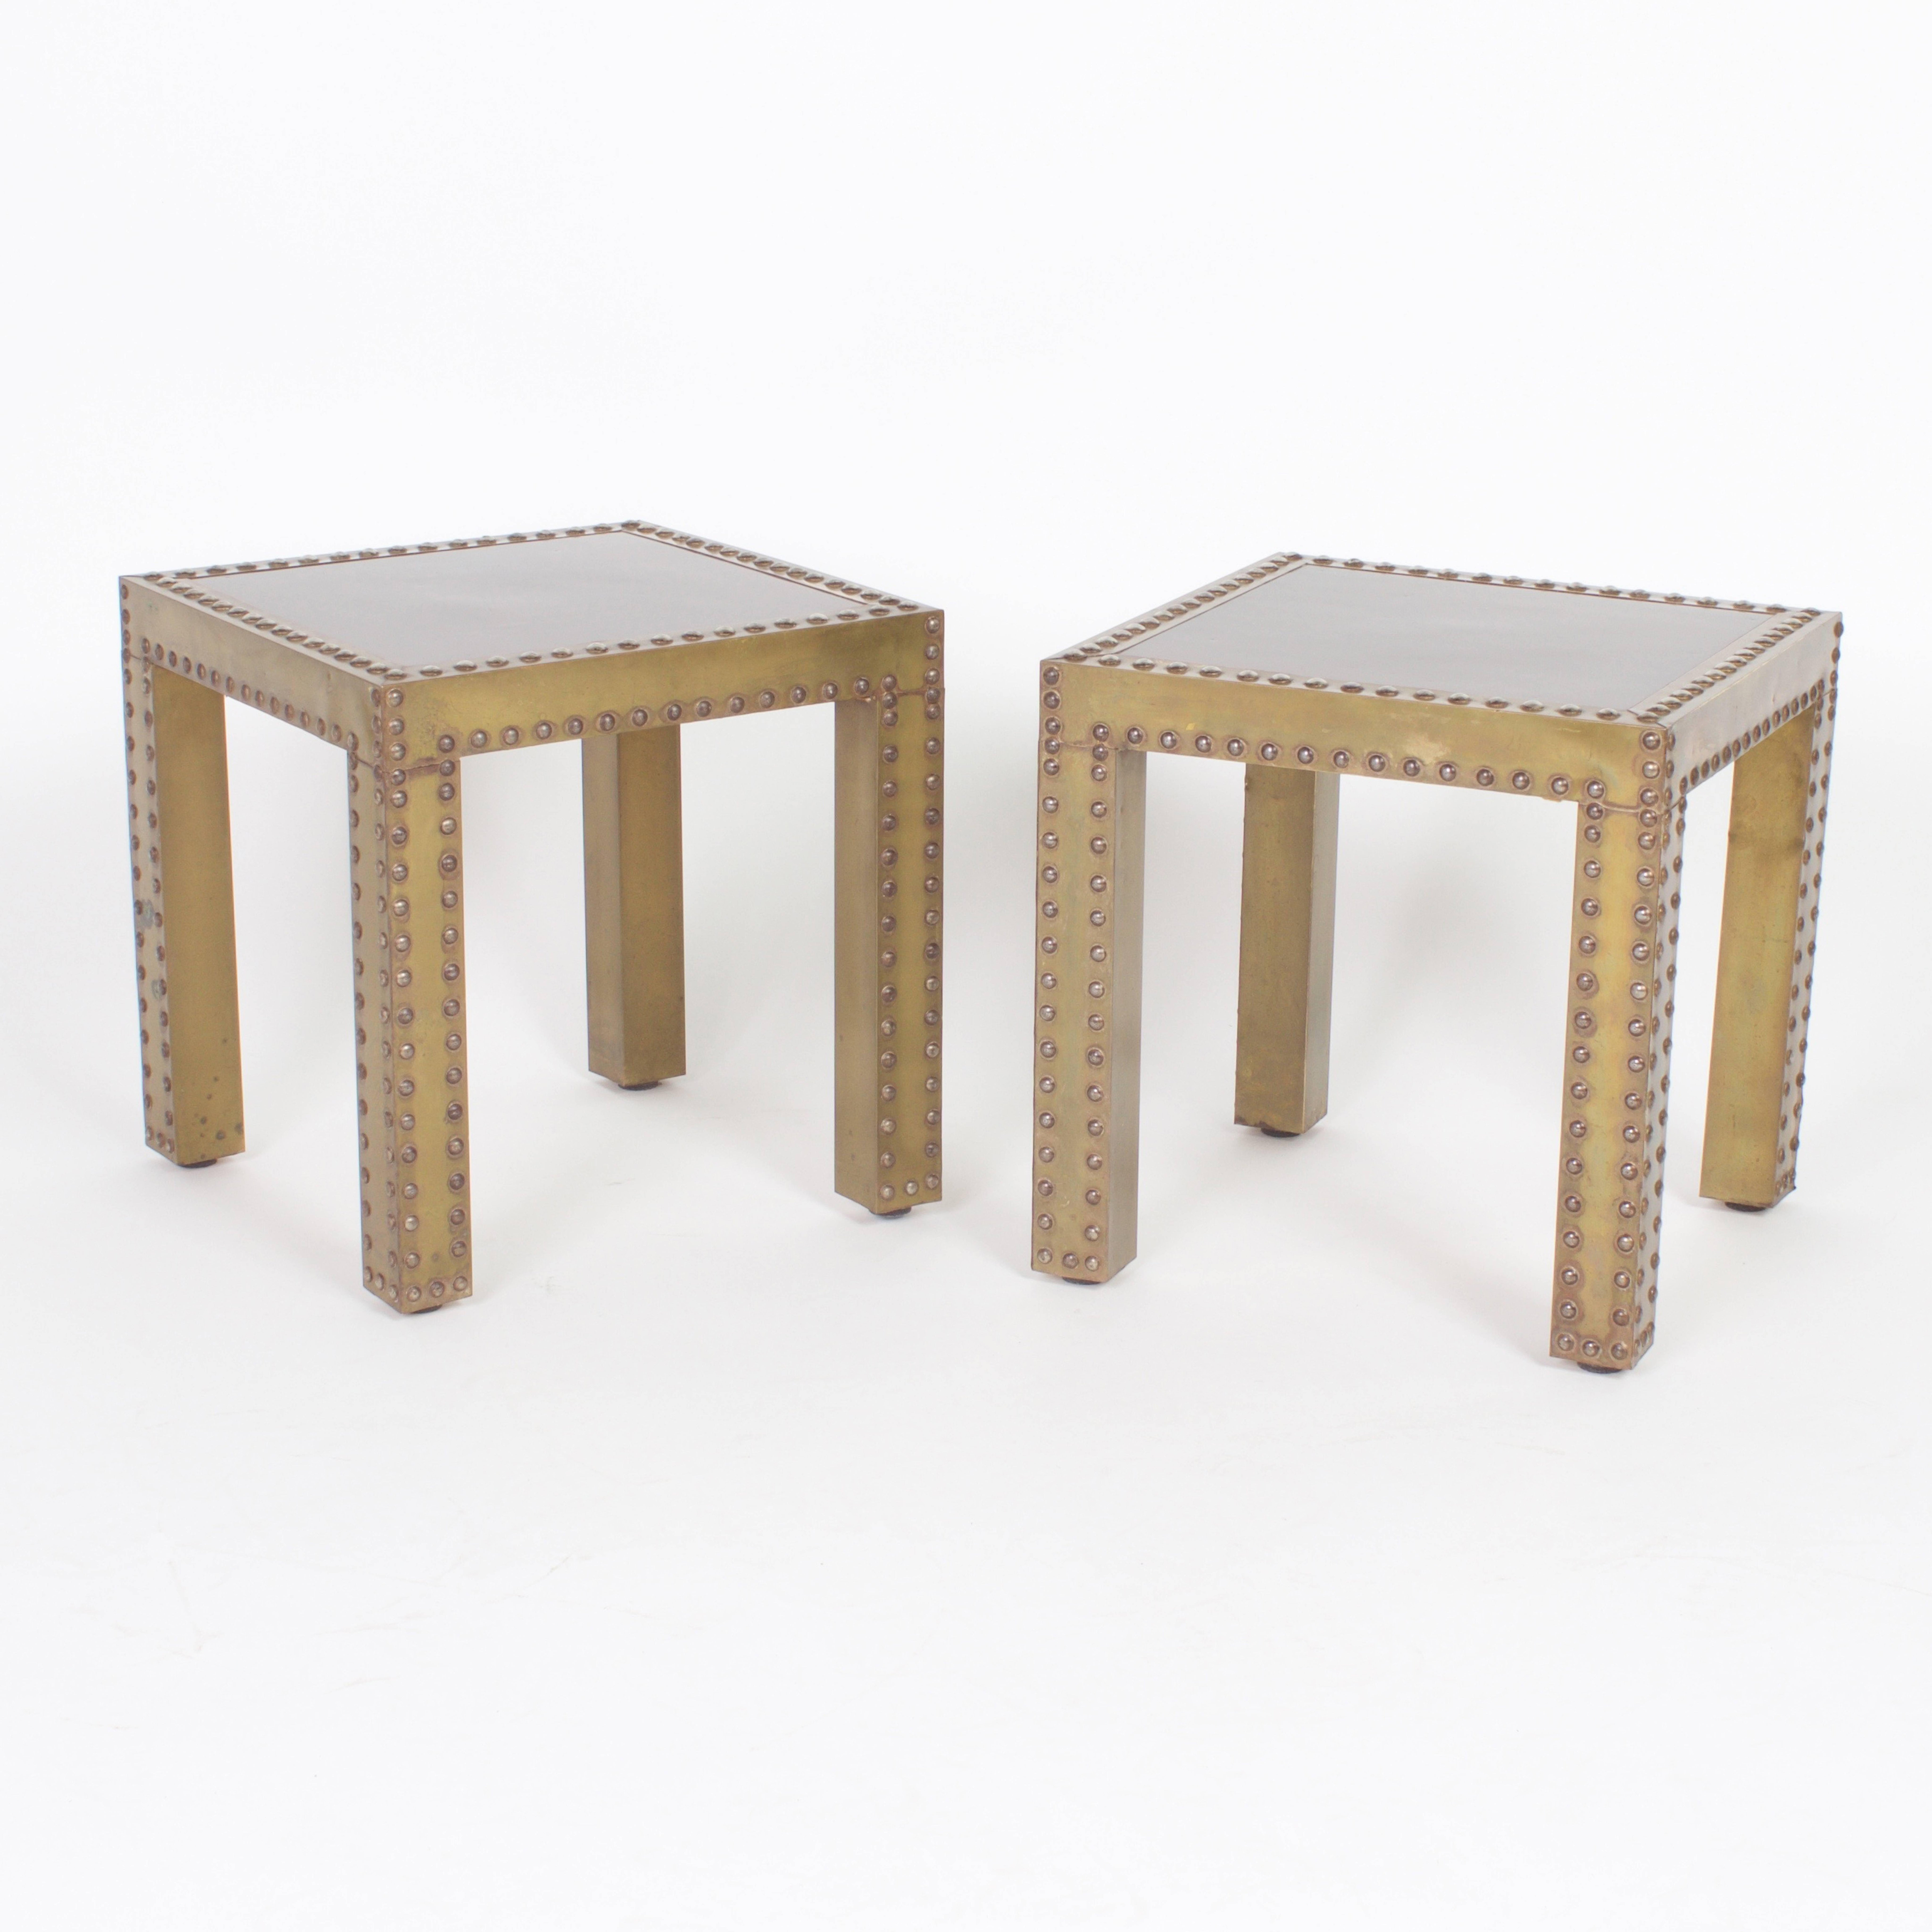 Pair of small Mid-Century Parsons tables or stands clad in brass and outlined in studs or tacks, with great patina. Hard to miss the Industrial influences. Could also be used as stools with cushions.

.
  